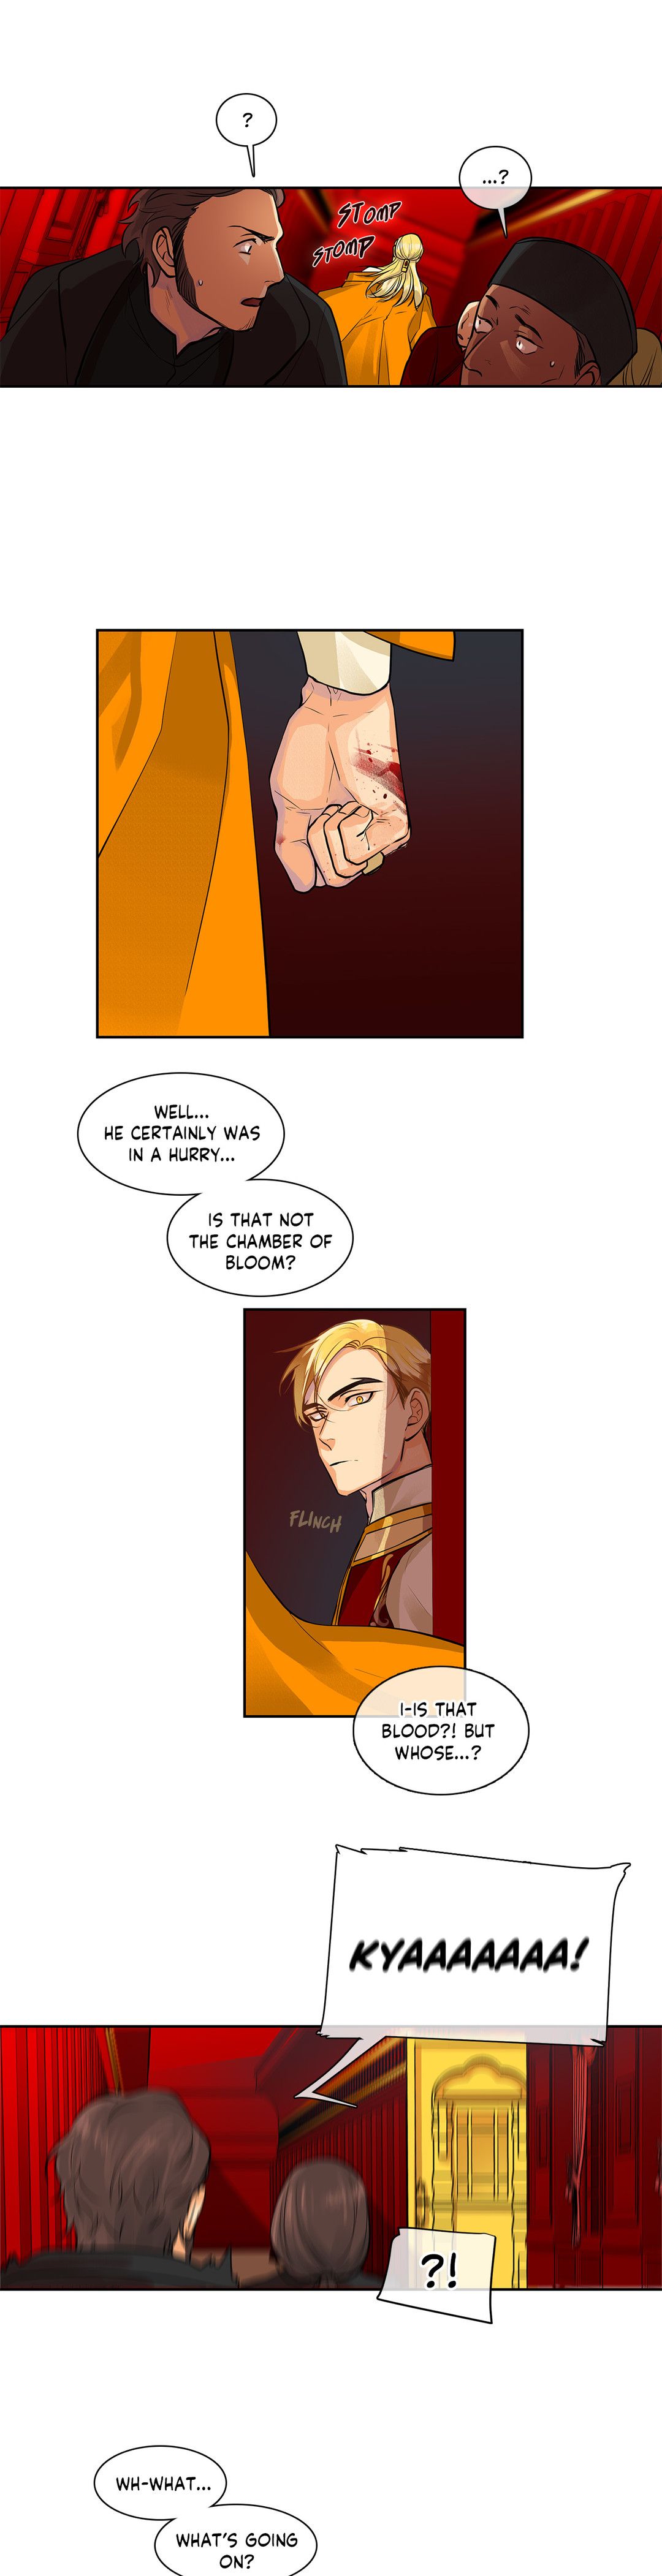 King's Maker - Page 3